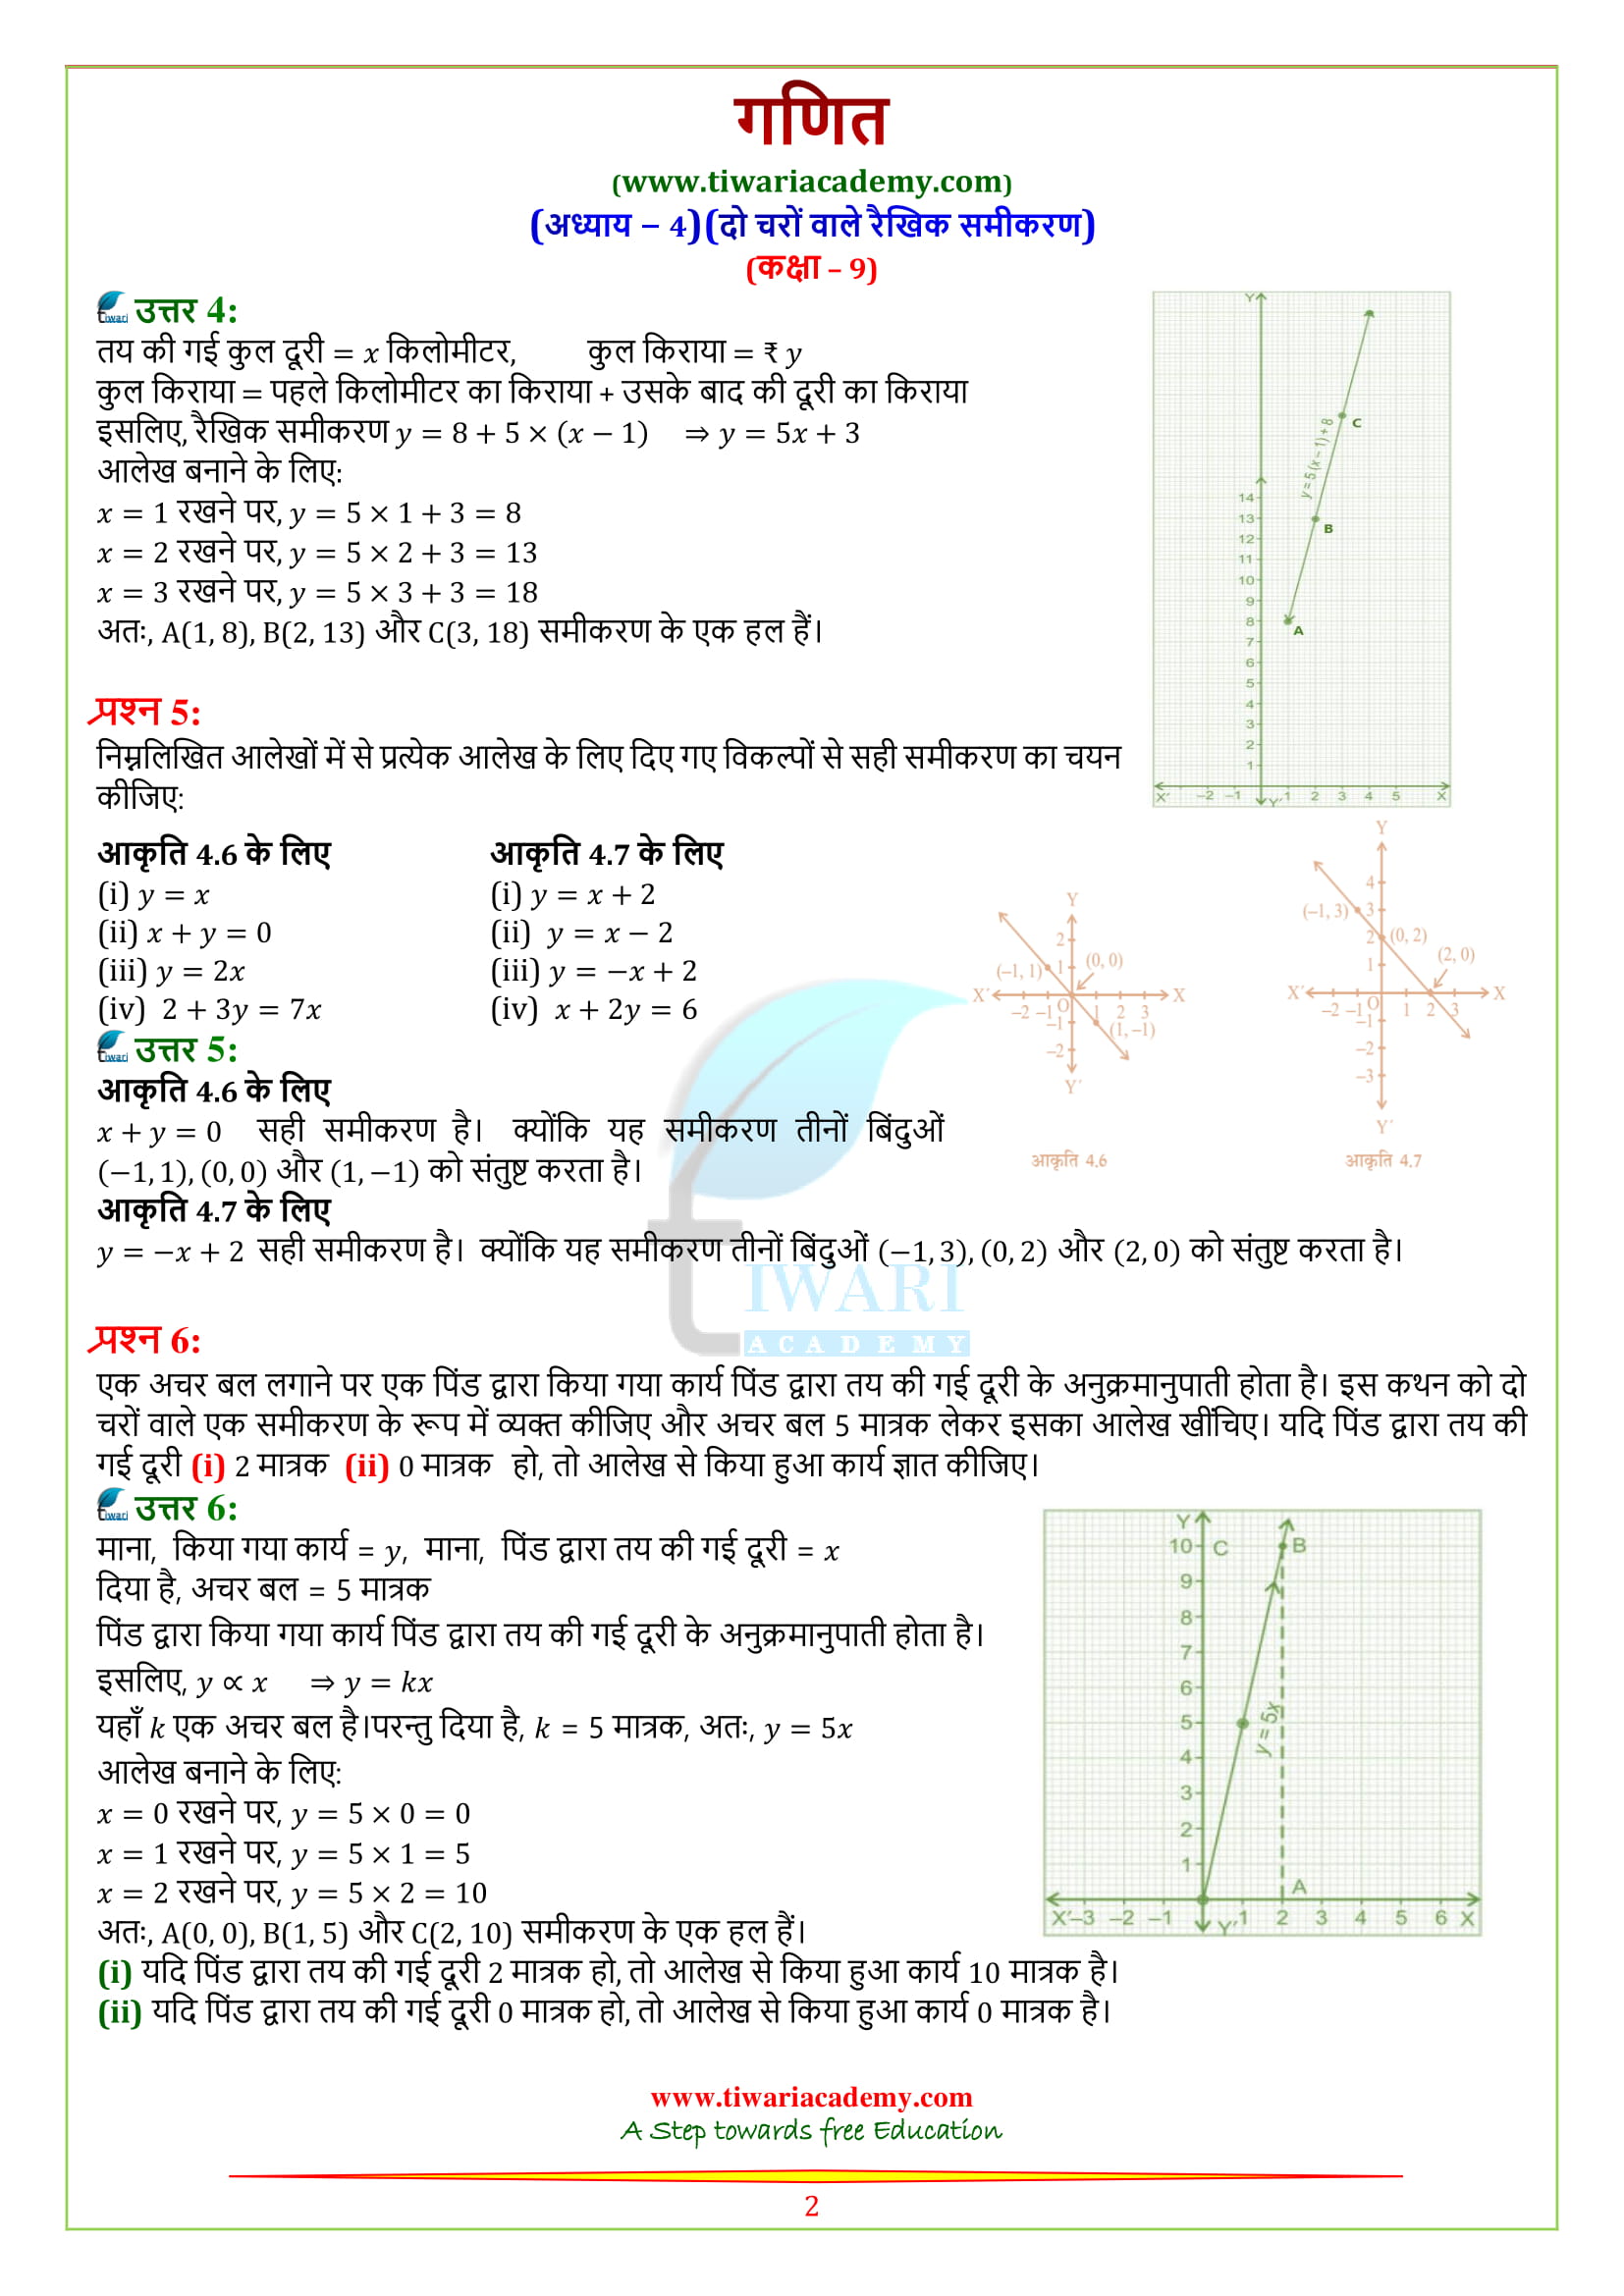 Solutions of Exercise 4.3 of Class 9 Maths in Hindi medium in PDF